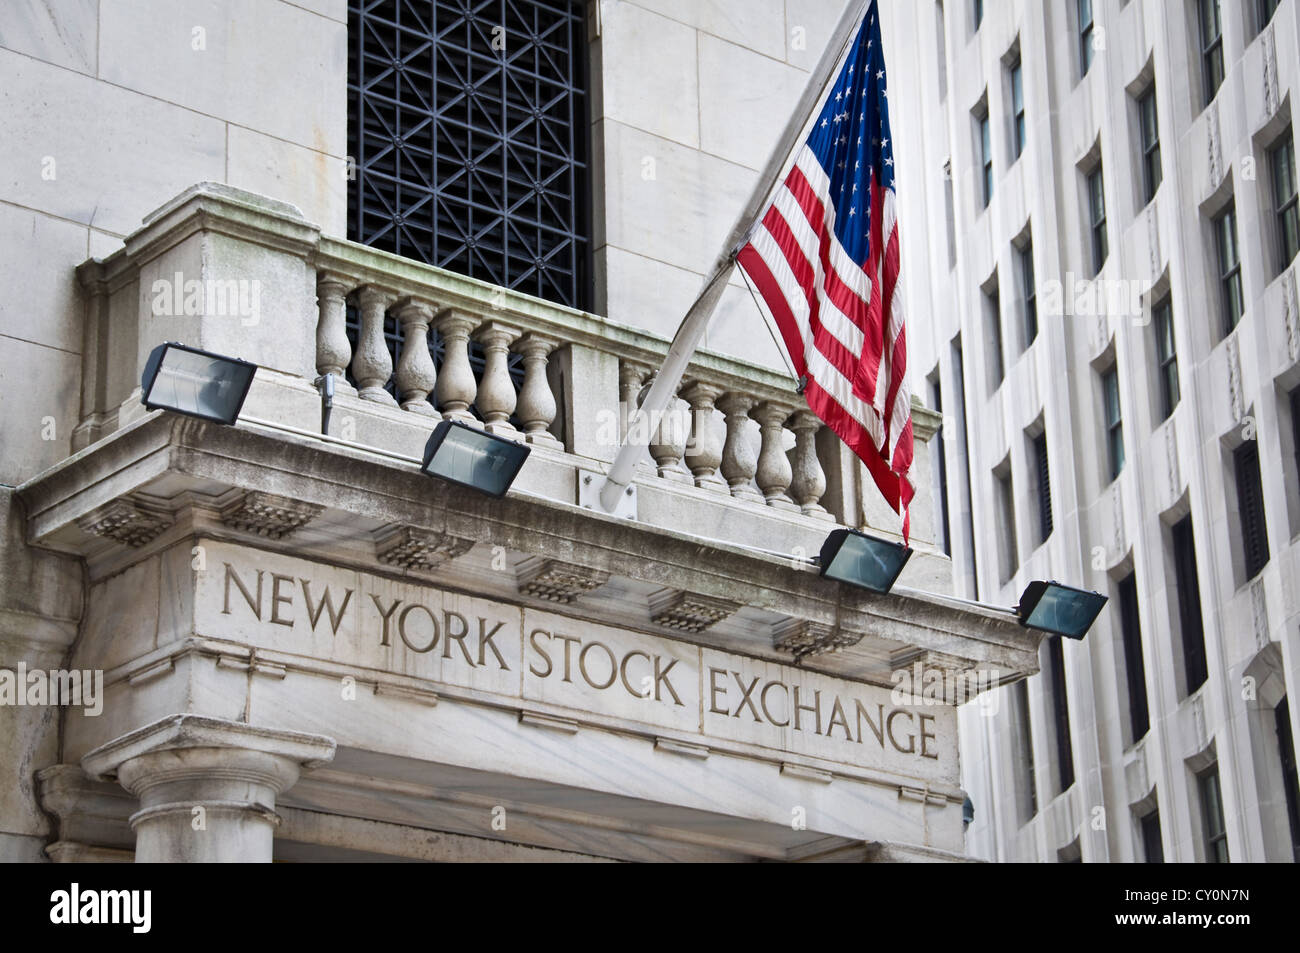 New York Stock exchange front facade with the american flag - New York City, USA Stock Photo